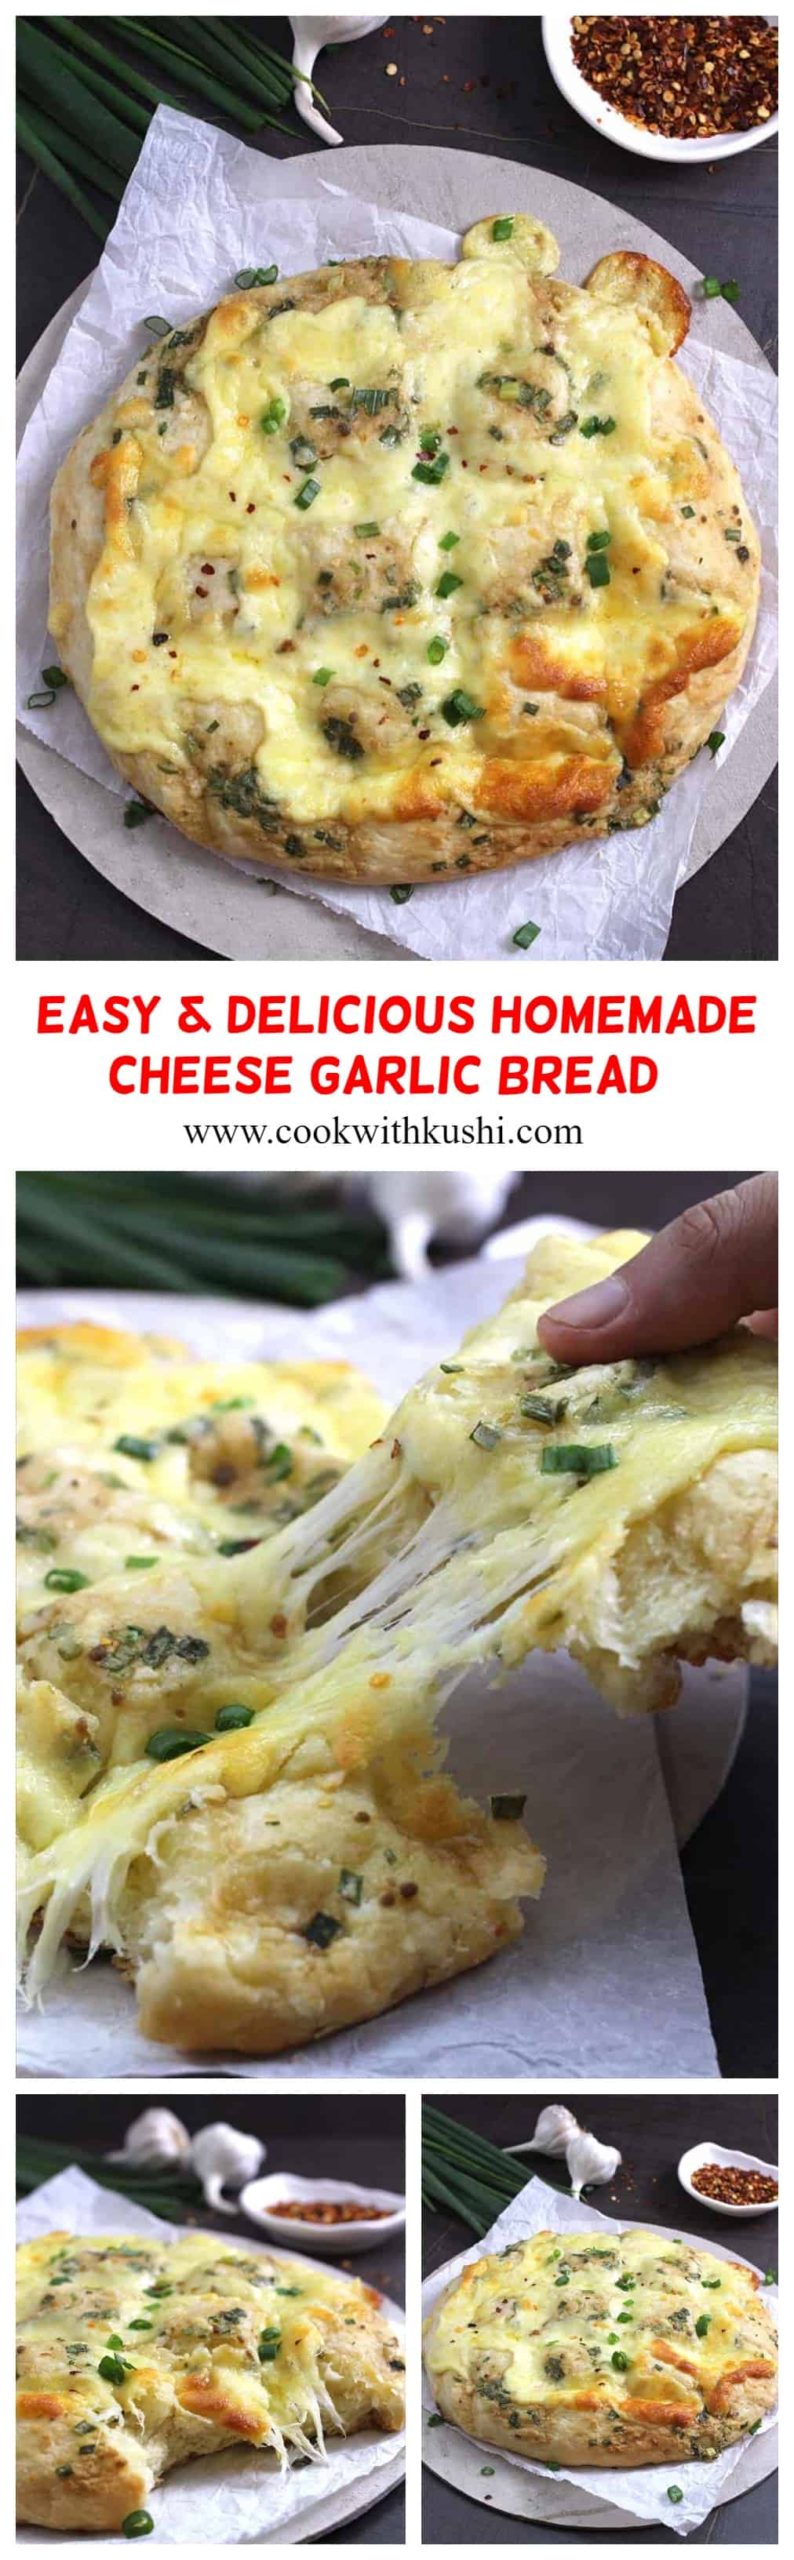 Homemade Garlic Cheese Bread is simple yet so delicious, cheesy and garlicky pull-apart bread or crack bread recipe that you will ever make. #garlicbread #cheesebread #dominos #Pizzahut #Olivegarden #Bun #Korean